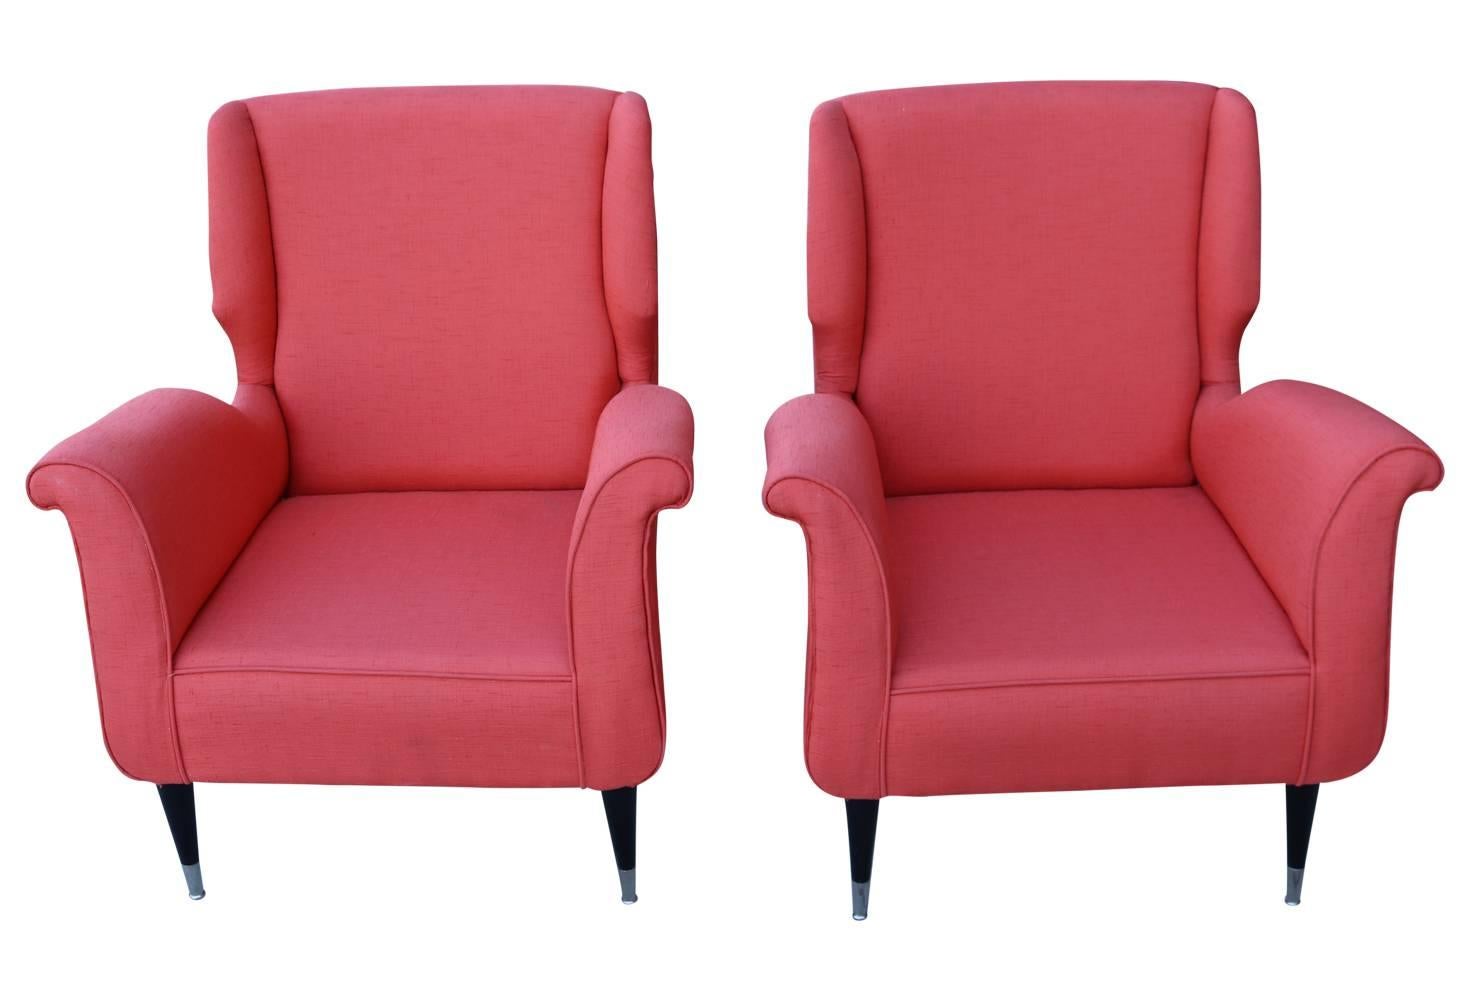 Adorable pair of pink orange (shrimp or salmon) colored vintage armchairs. Awesome sculptural curves, vibrant color, black legs and chrome feet make these chairs real showstoppers! 14.5 inch seat height. Very light wear.